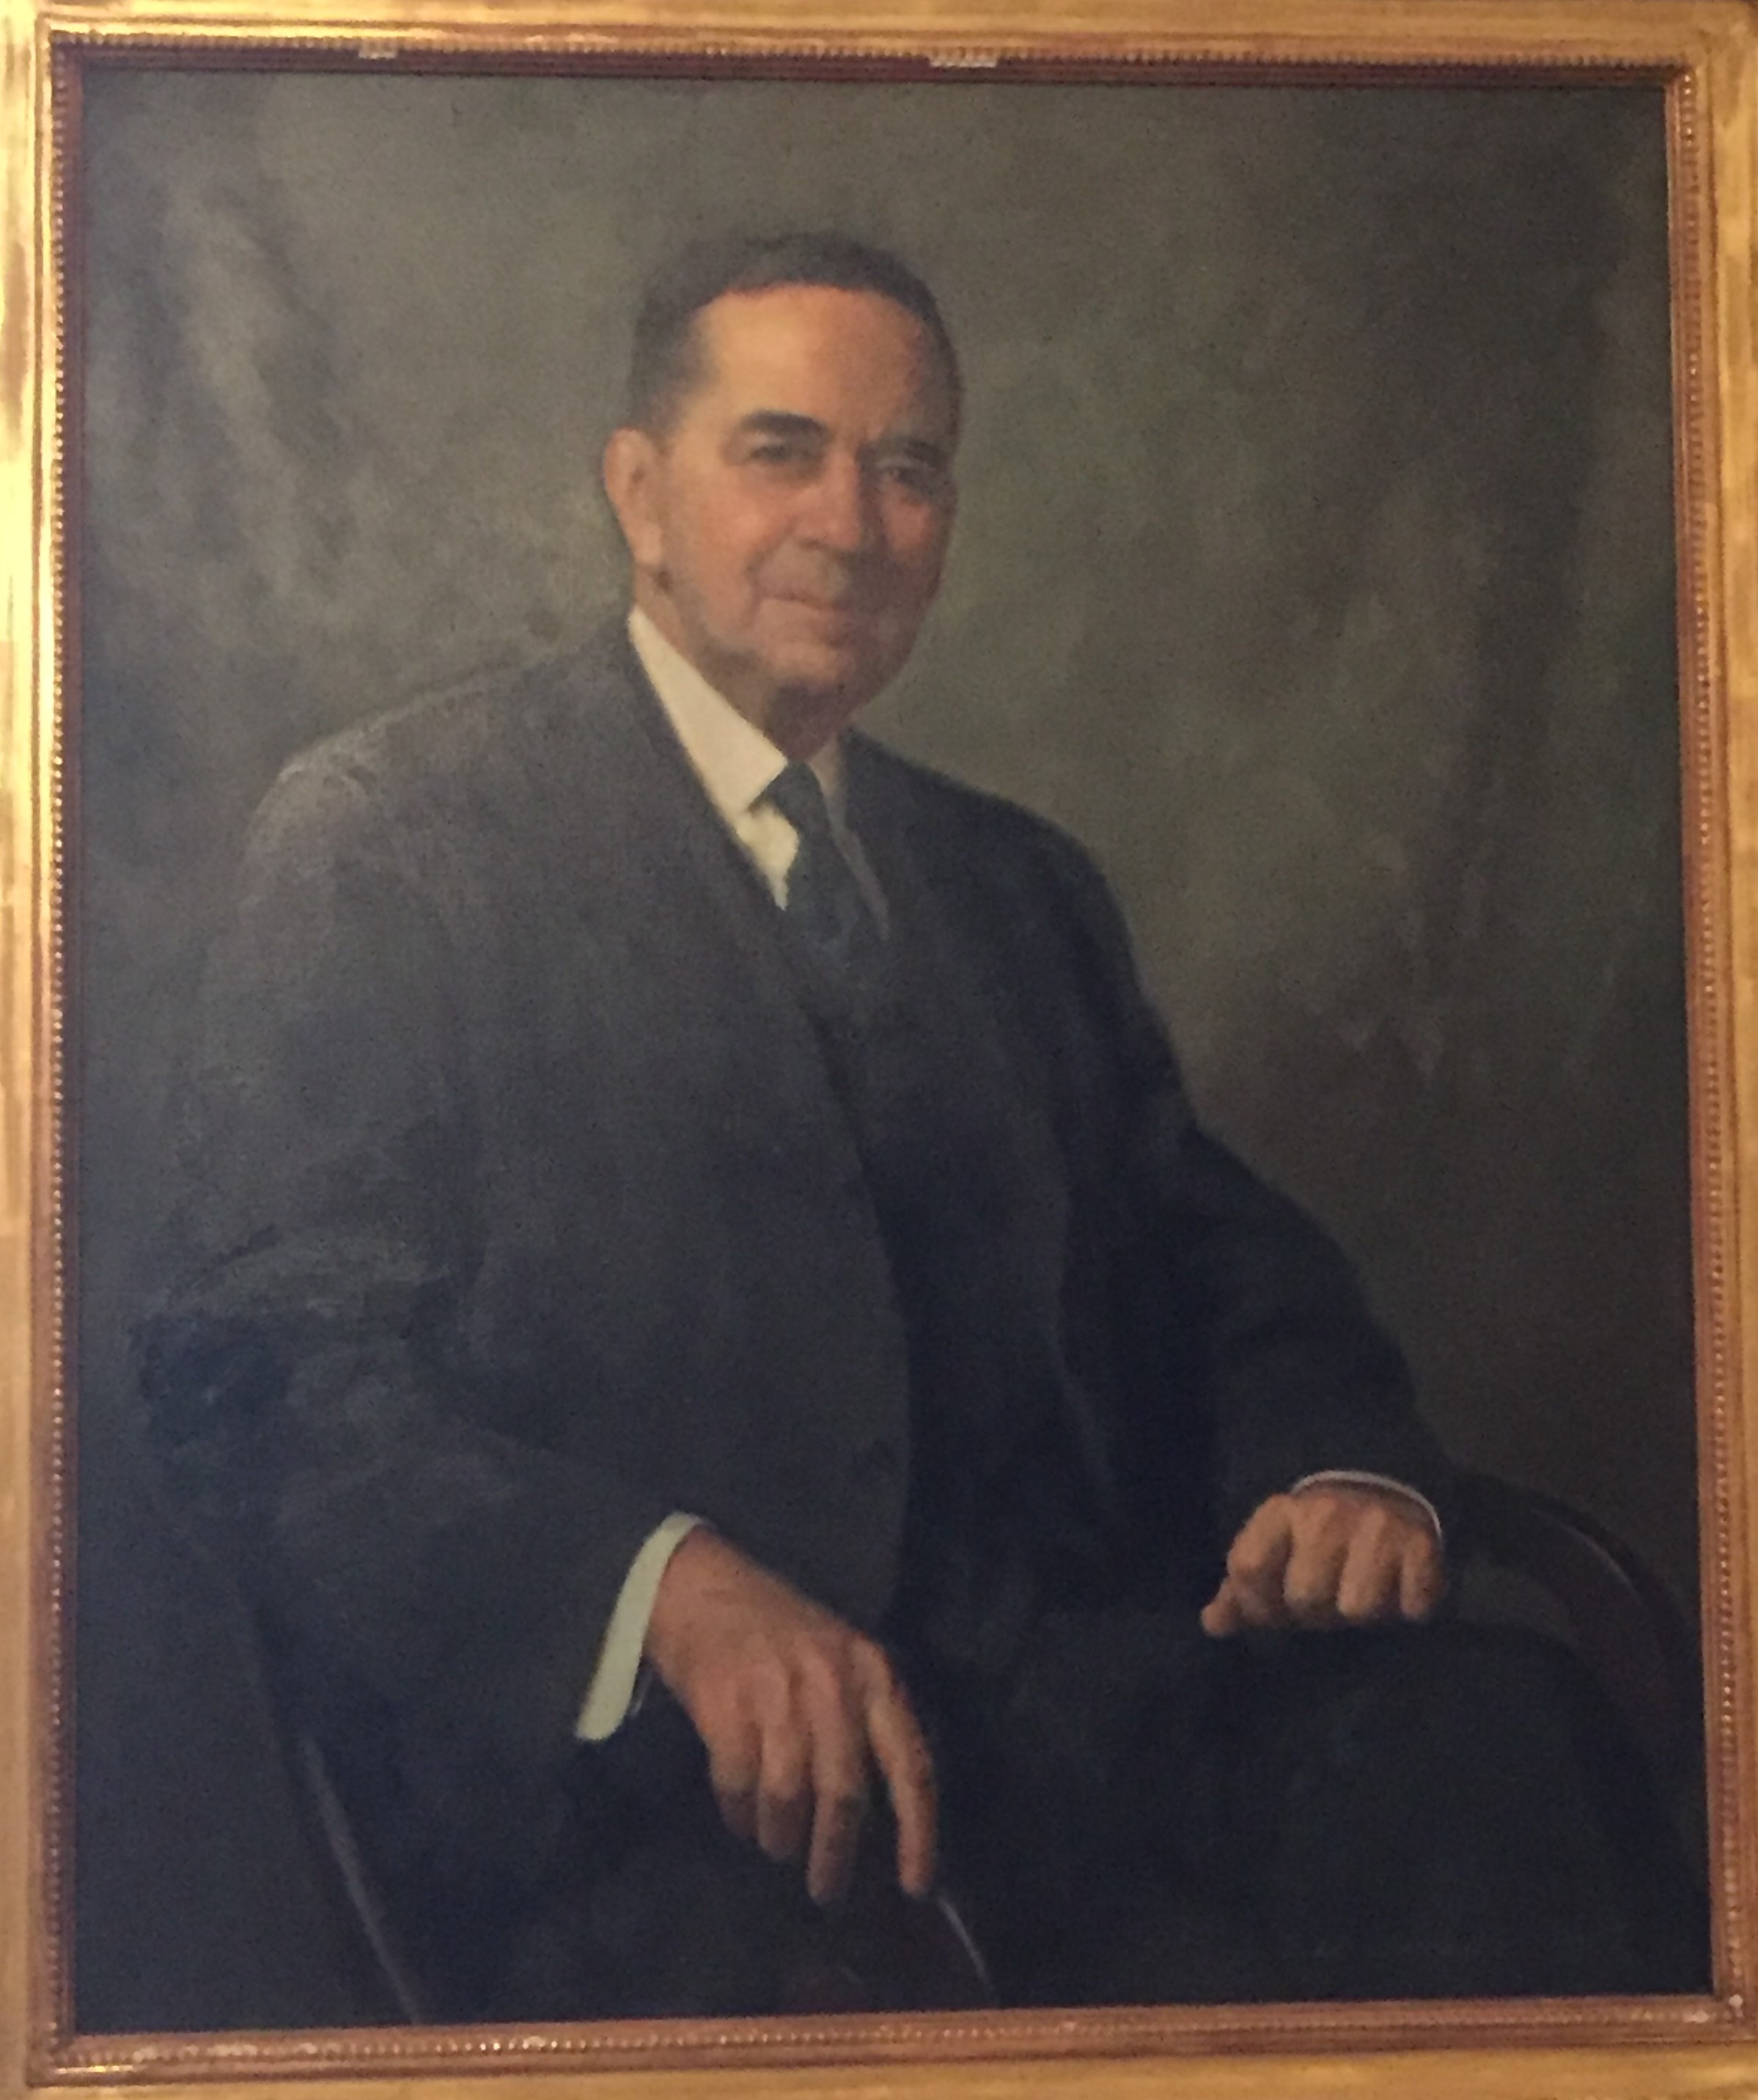 Painted portrait of W. Parsons Todd. He faces the viewer and has a slight smile. He is wearing a dark suit and tie.